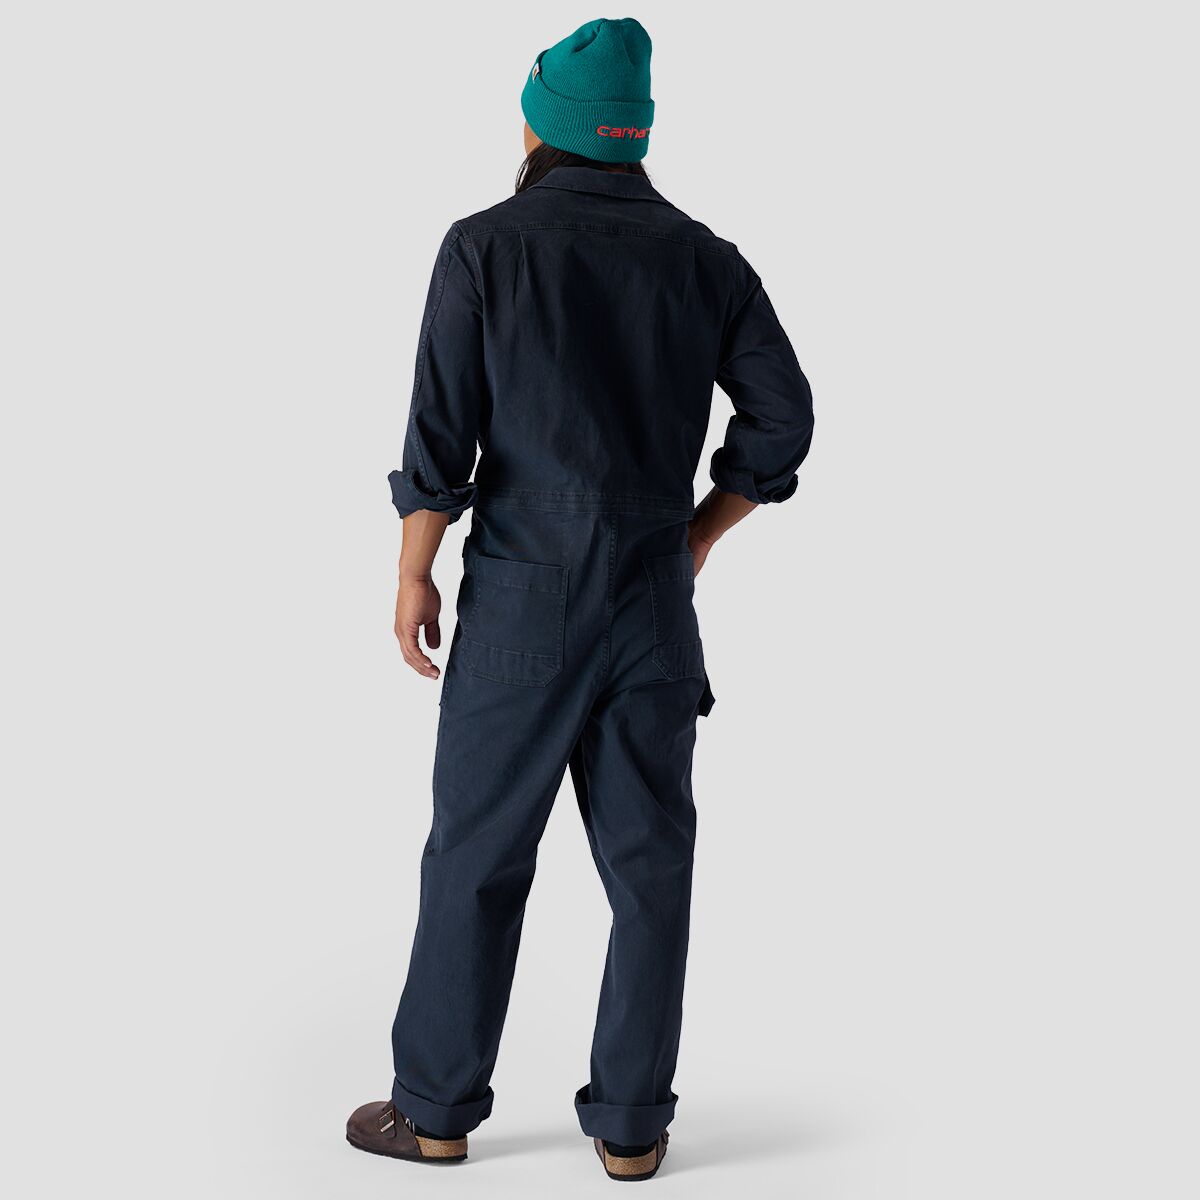 Stoic Long-Sleeve Venture Coverall - Men's Stretch Limo, XL